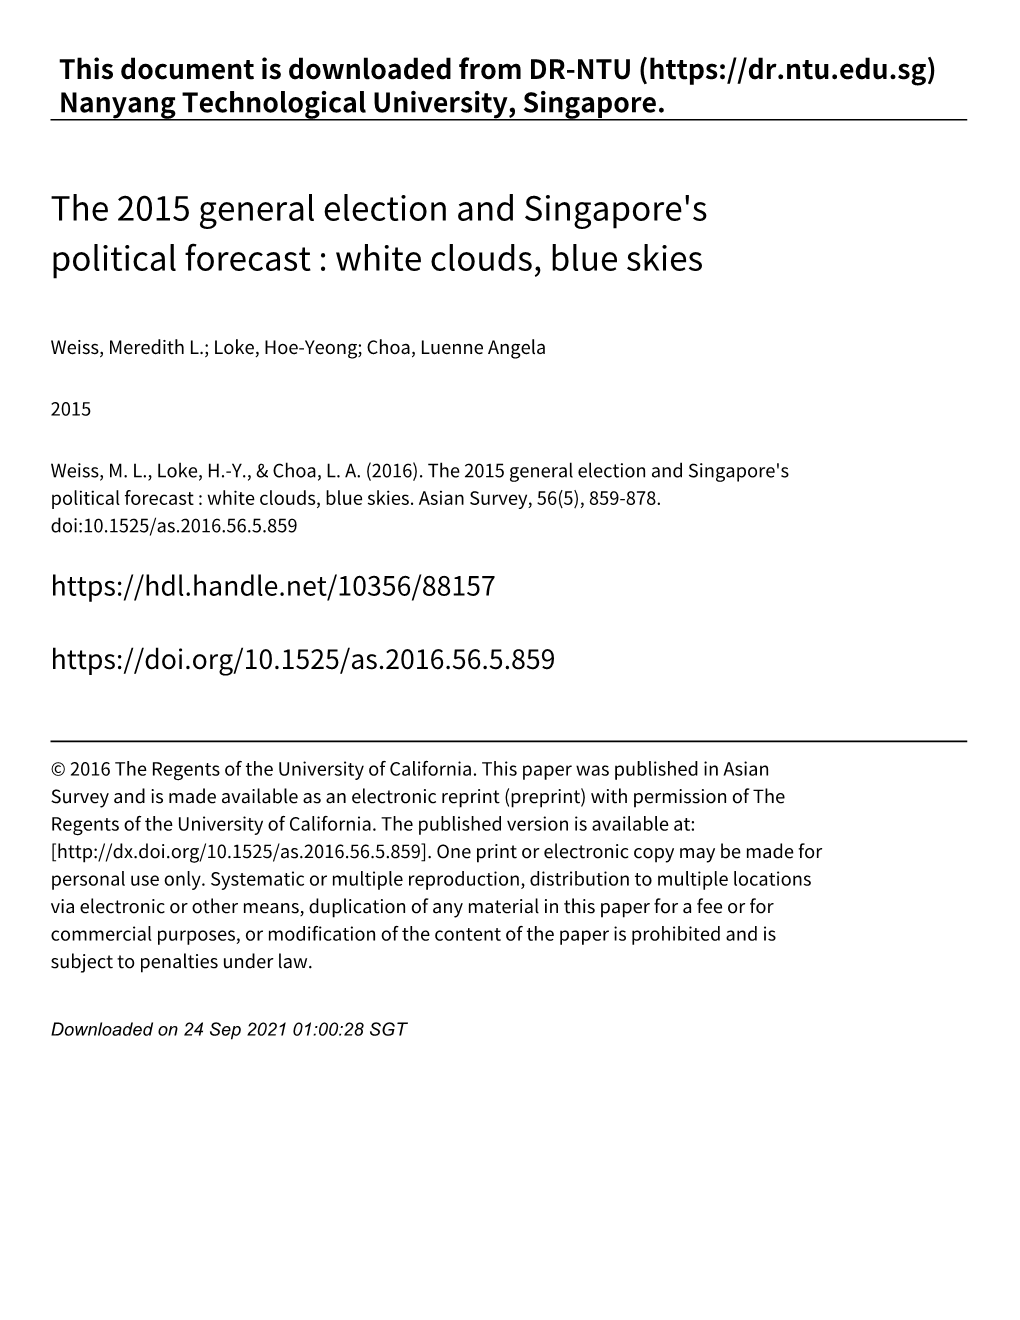 The 2015 General Election and Singapore's Political Forecast : White Clouds, Blue Skies